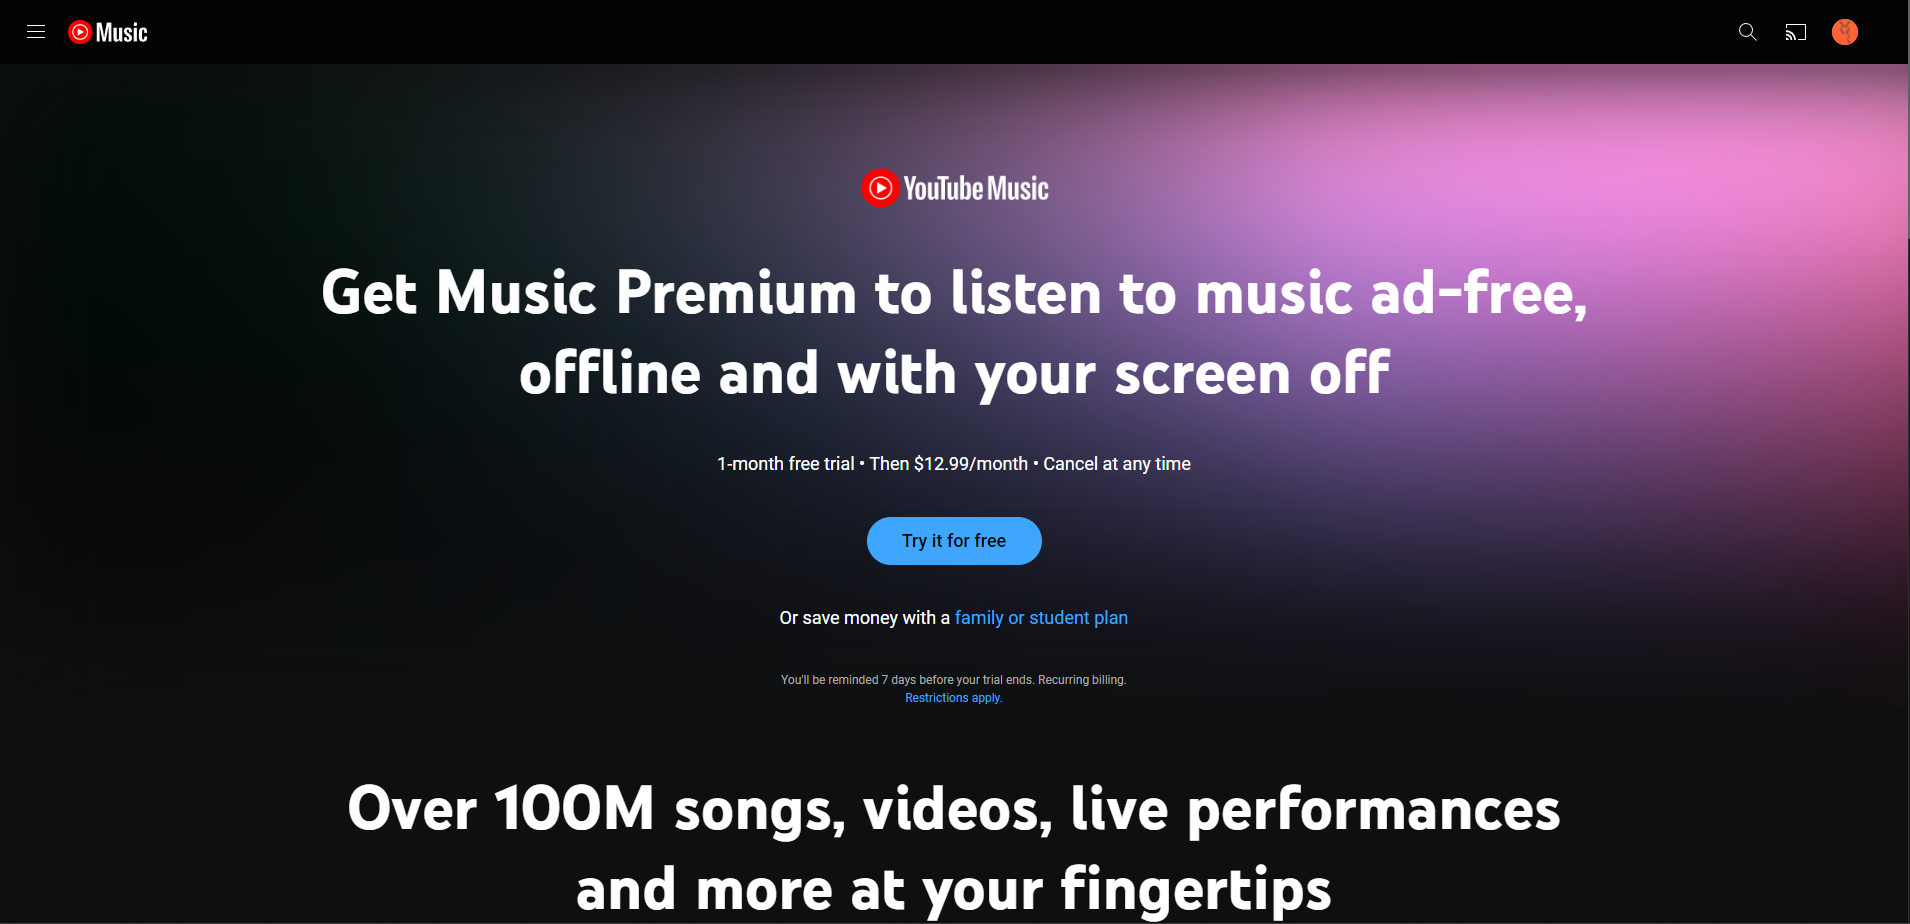 This image is a screenshot of a YouTube Music promotional page. The main message in the bold white text says, "Get Music Premium to listen to music ad-free, offline and with your screen off," followed by a smaller text offering a "1-month free trial; Then $12.99/month - Cancel at any time." 